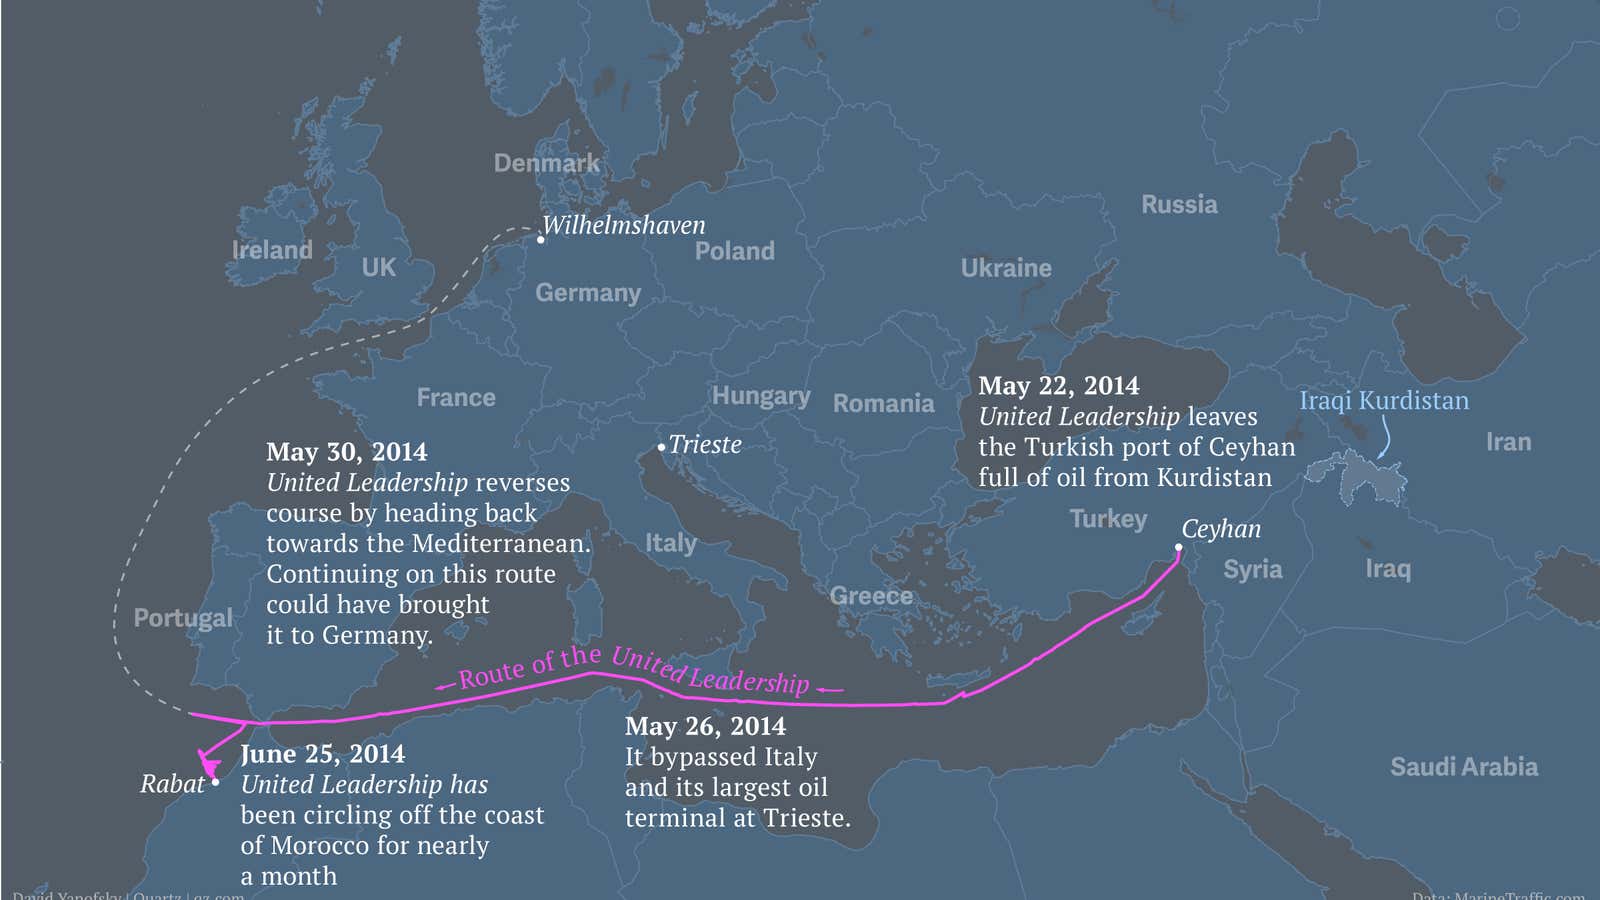 This forlorn oil tanker has been marooned off the Moroccan coast for three weeks